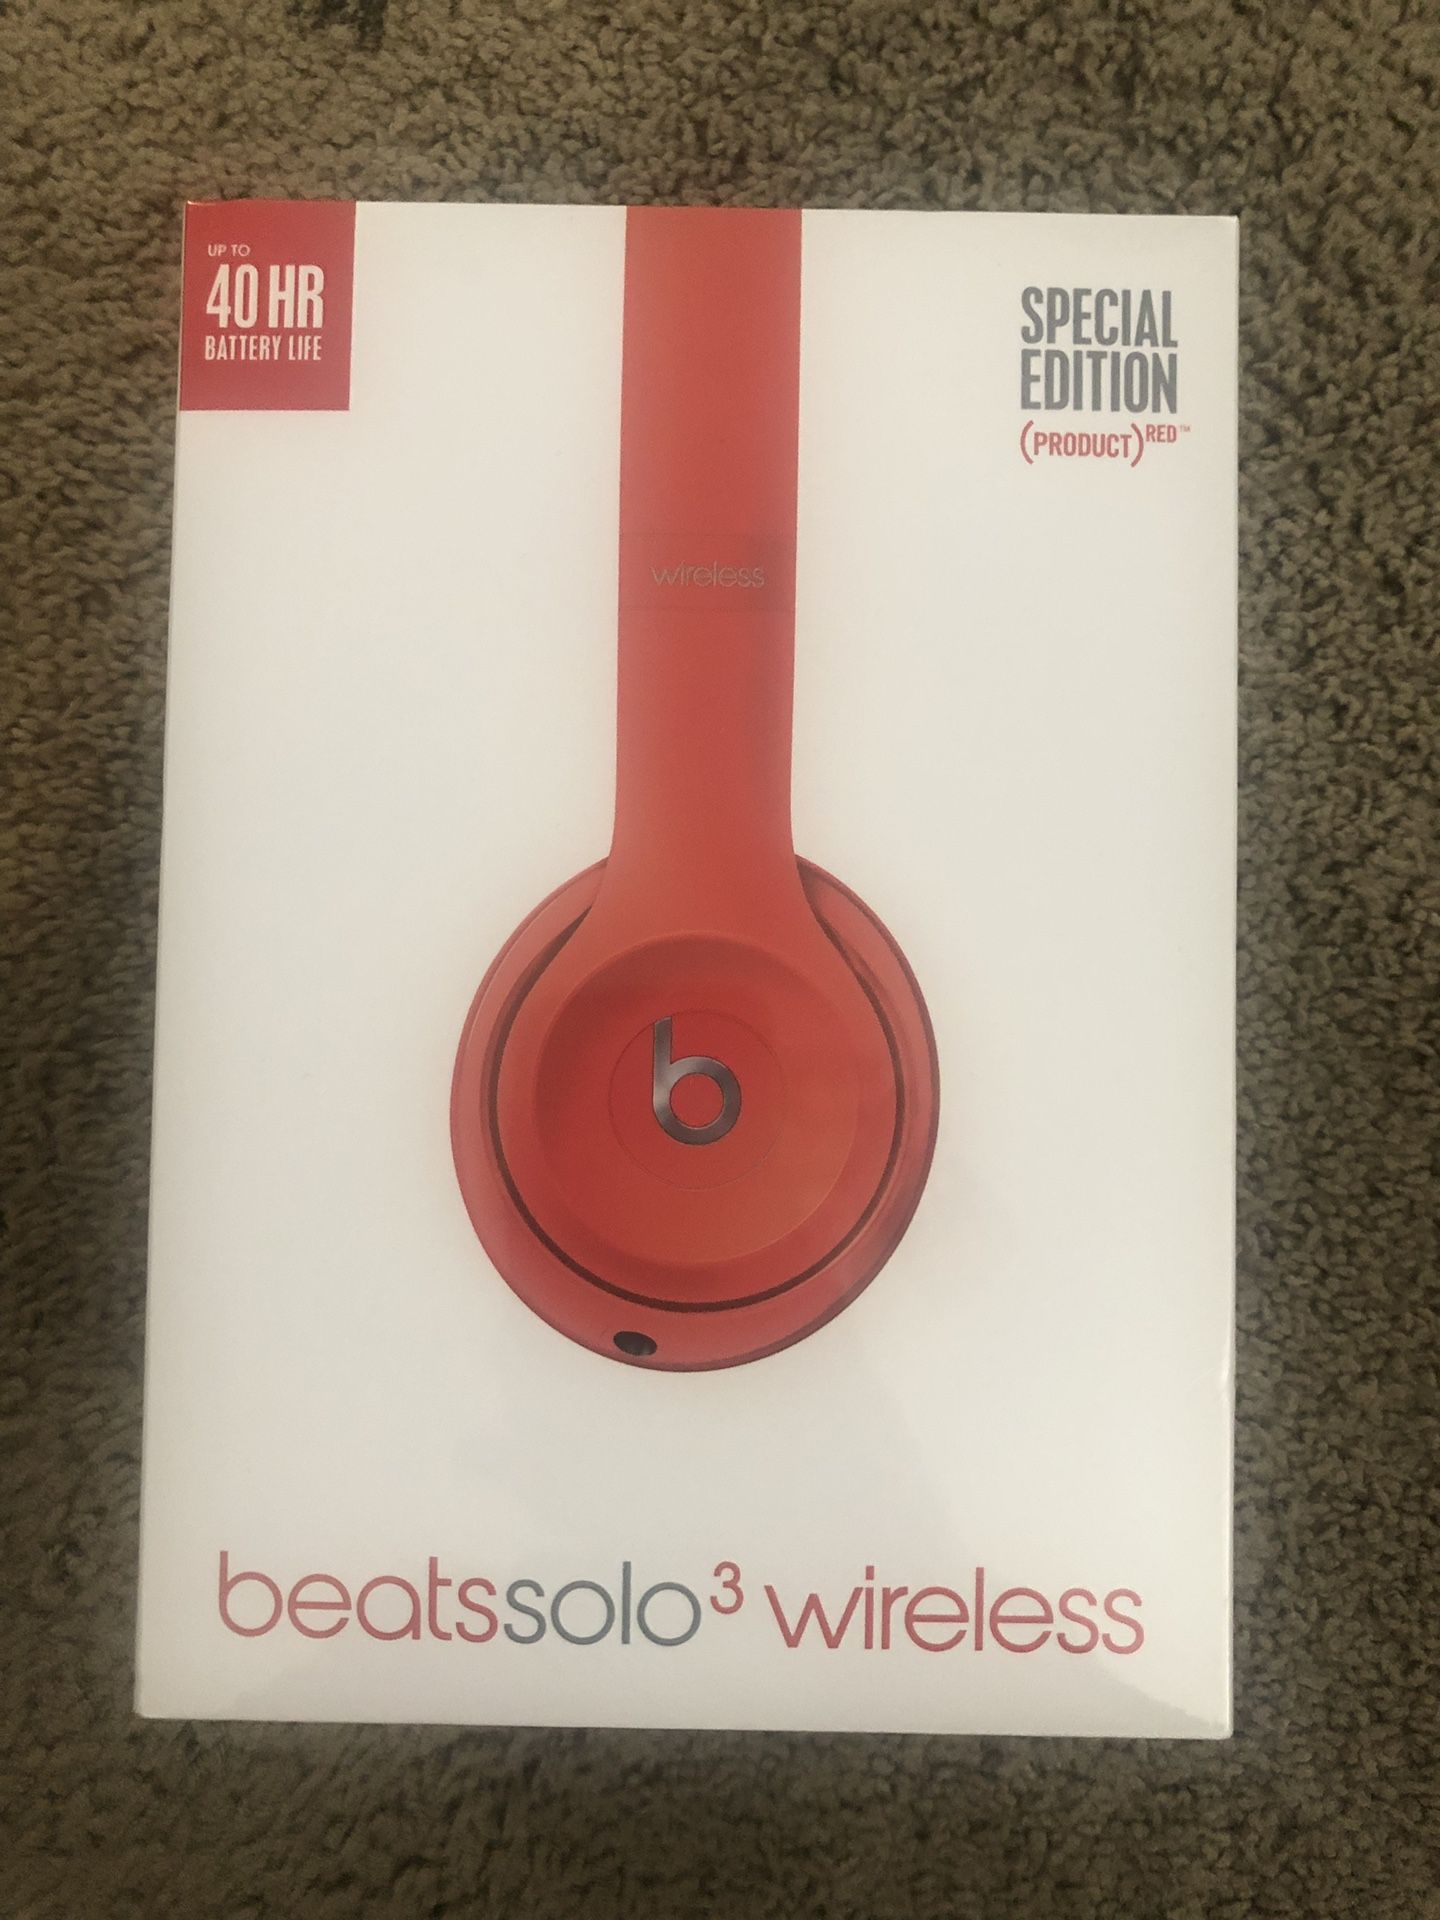 Brand new, unopened Beats Solo3 Wireless Headphones (PRODUCT RED) $175